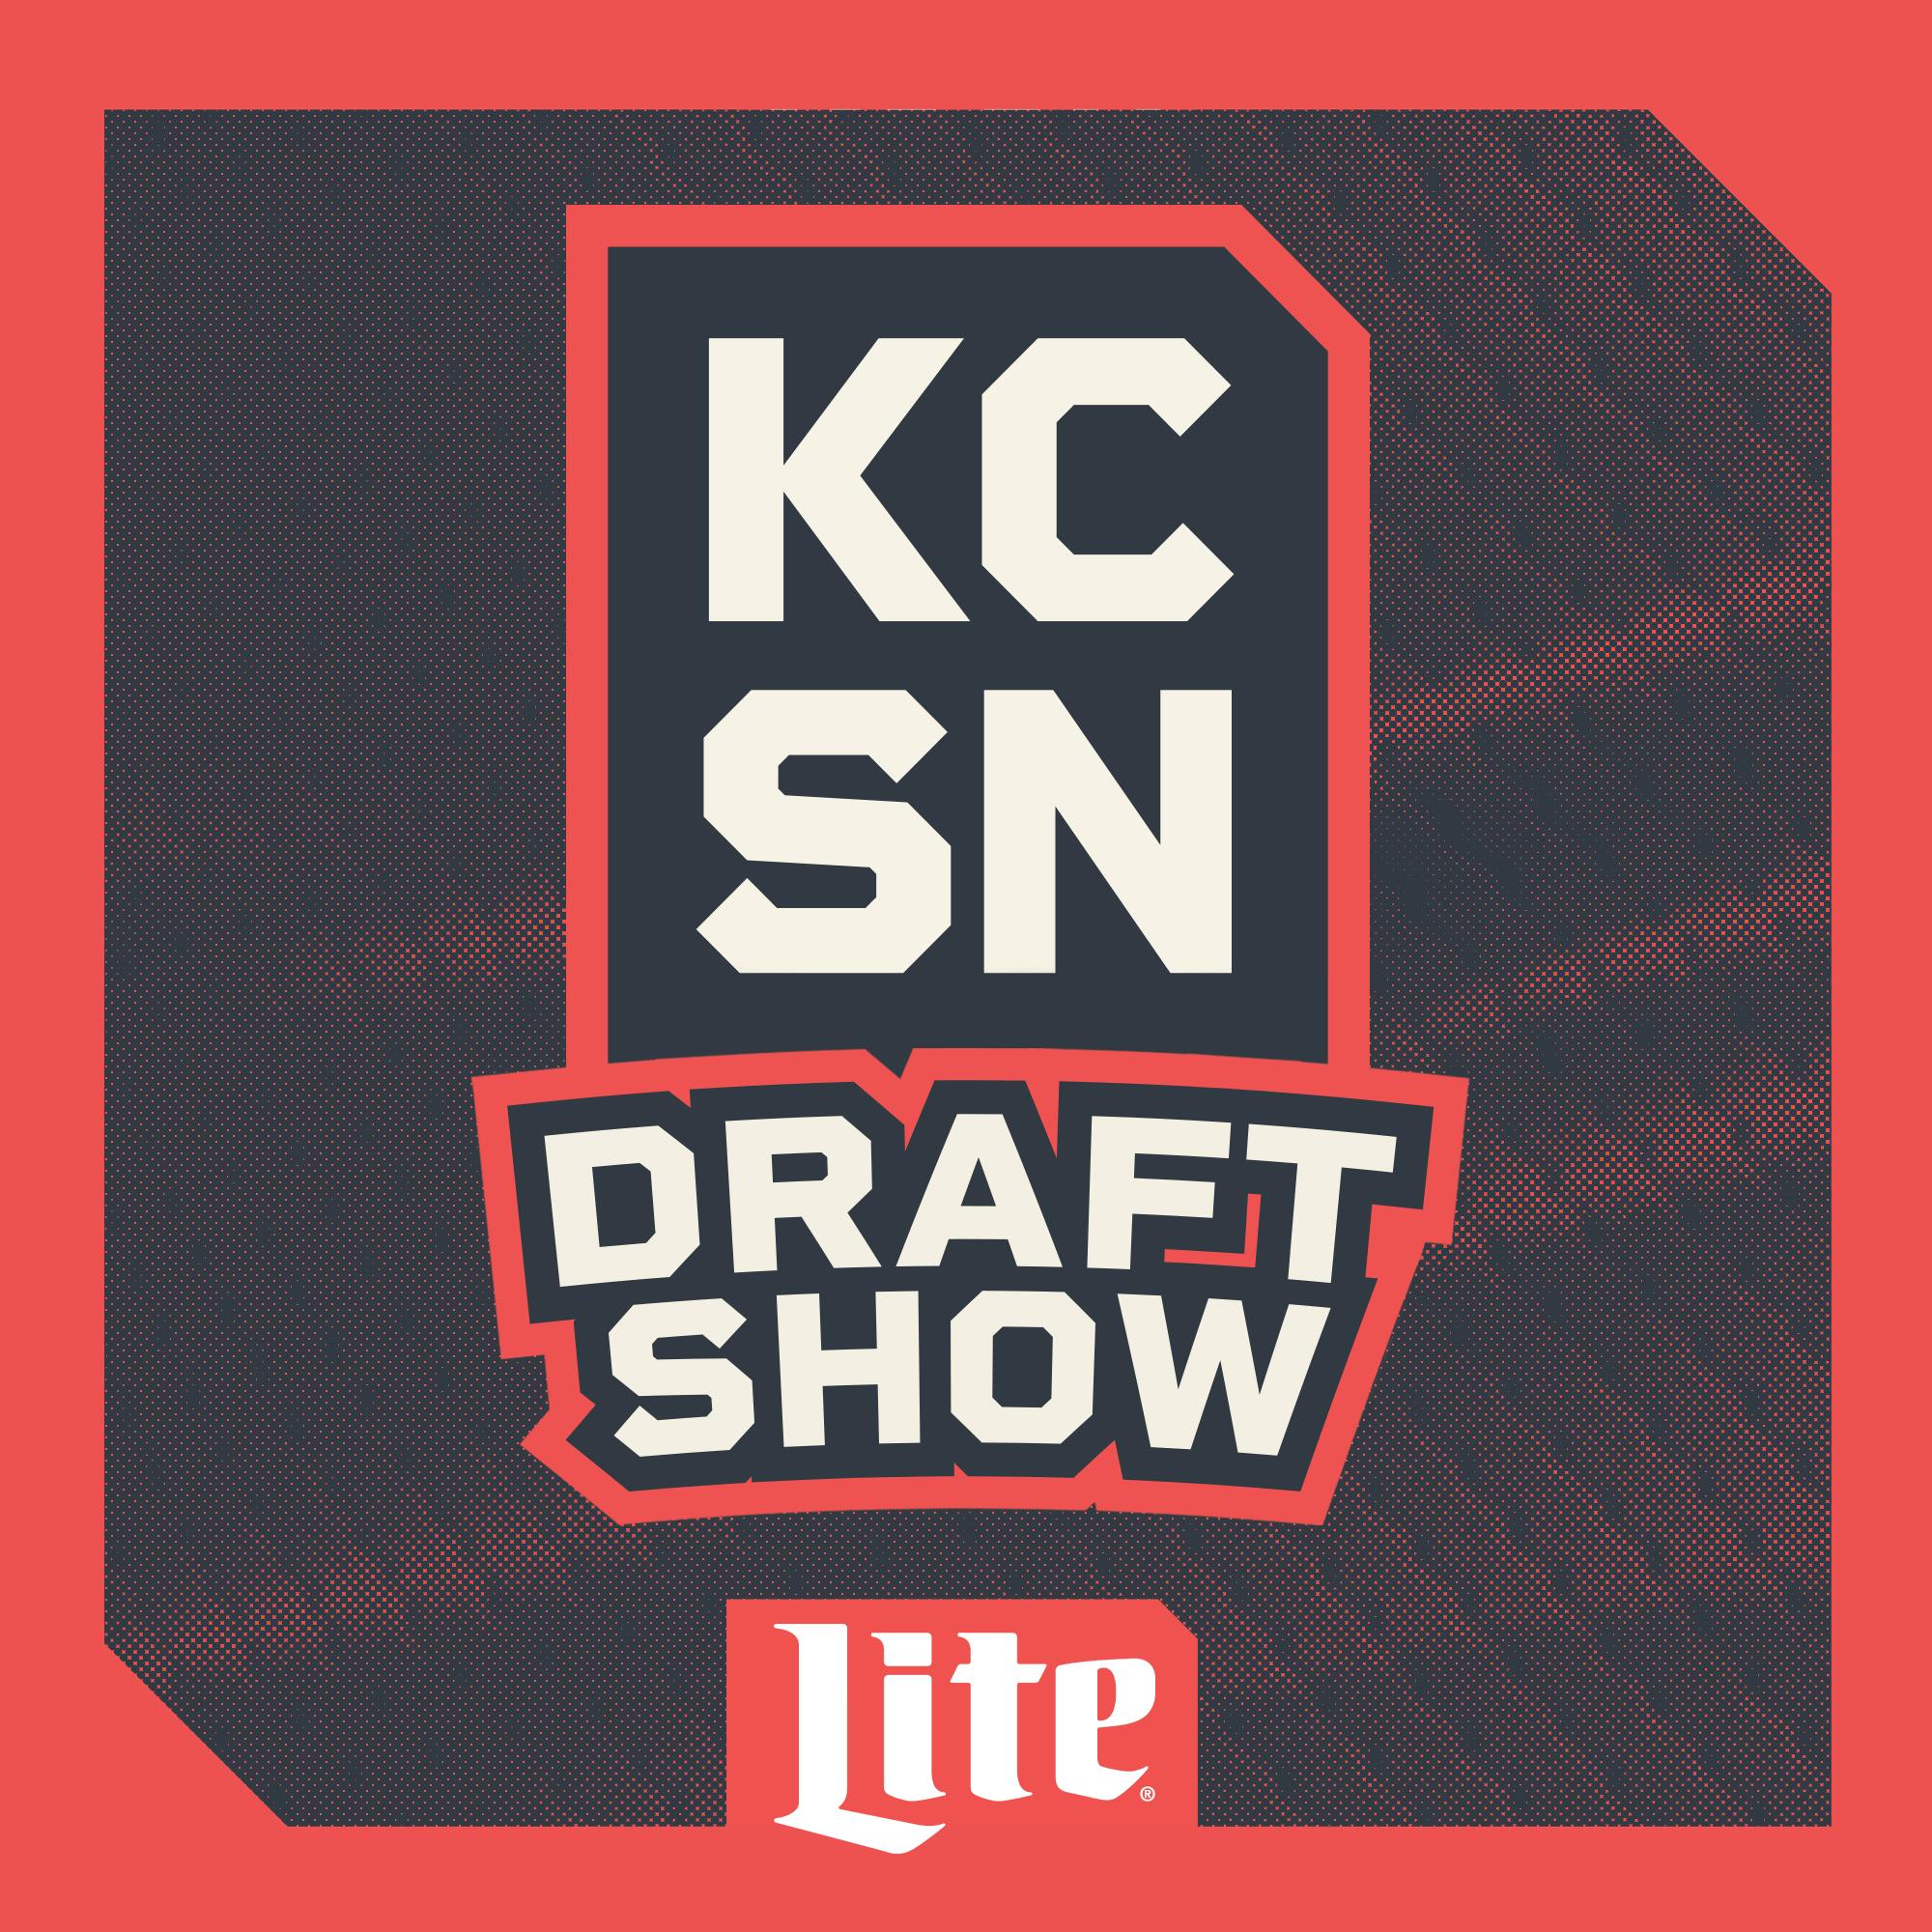 Breaking Down Chiefs' Selection of Versatile Virginia Tech DB Chamarri Conner in 3rd Round | KCSN Draft 4/28